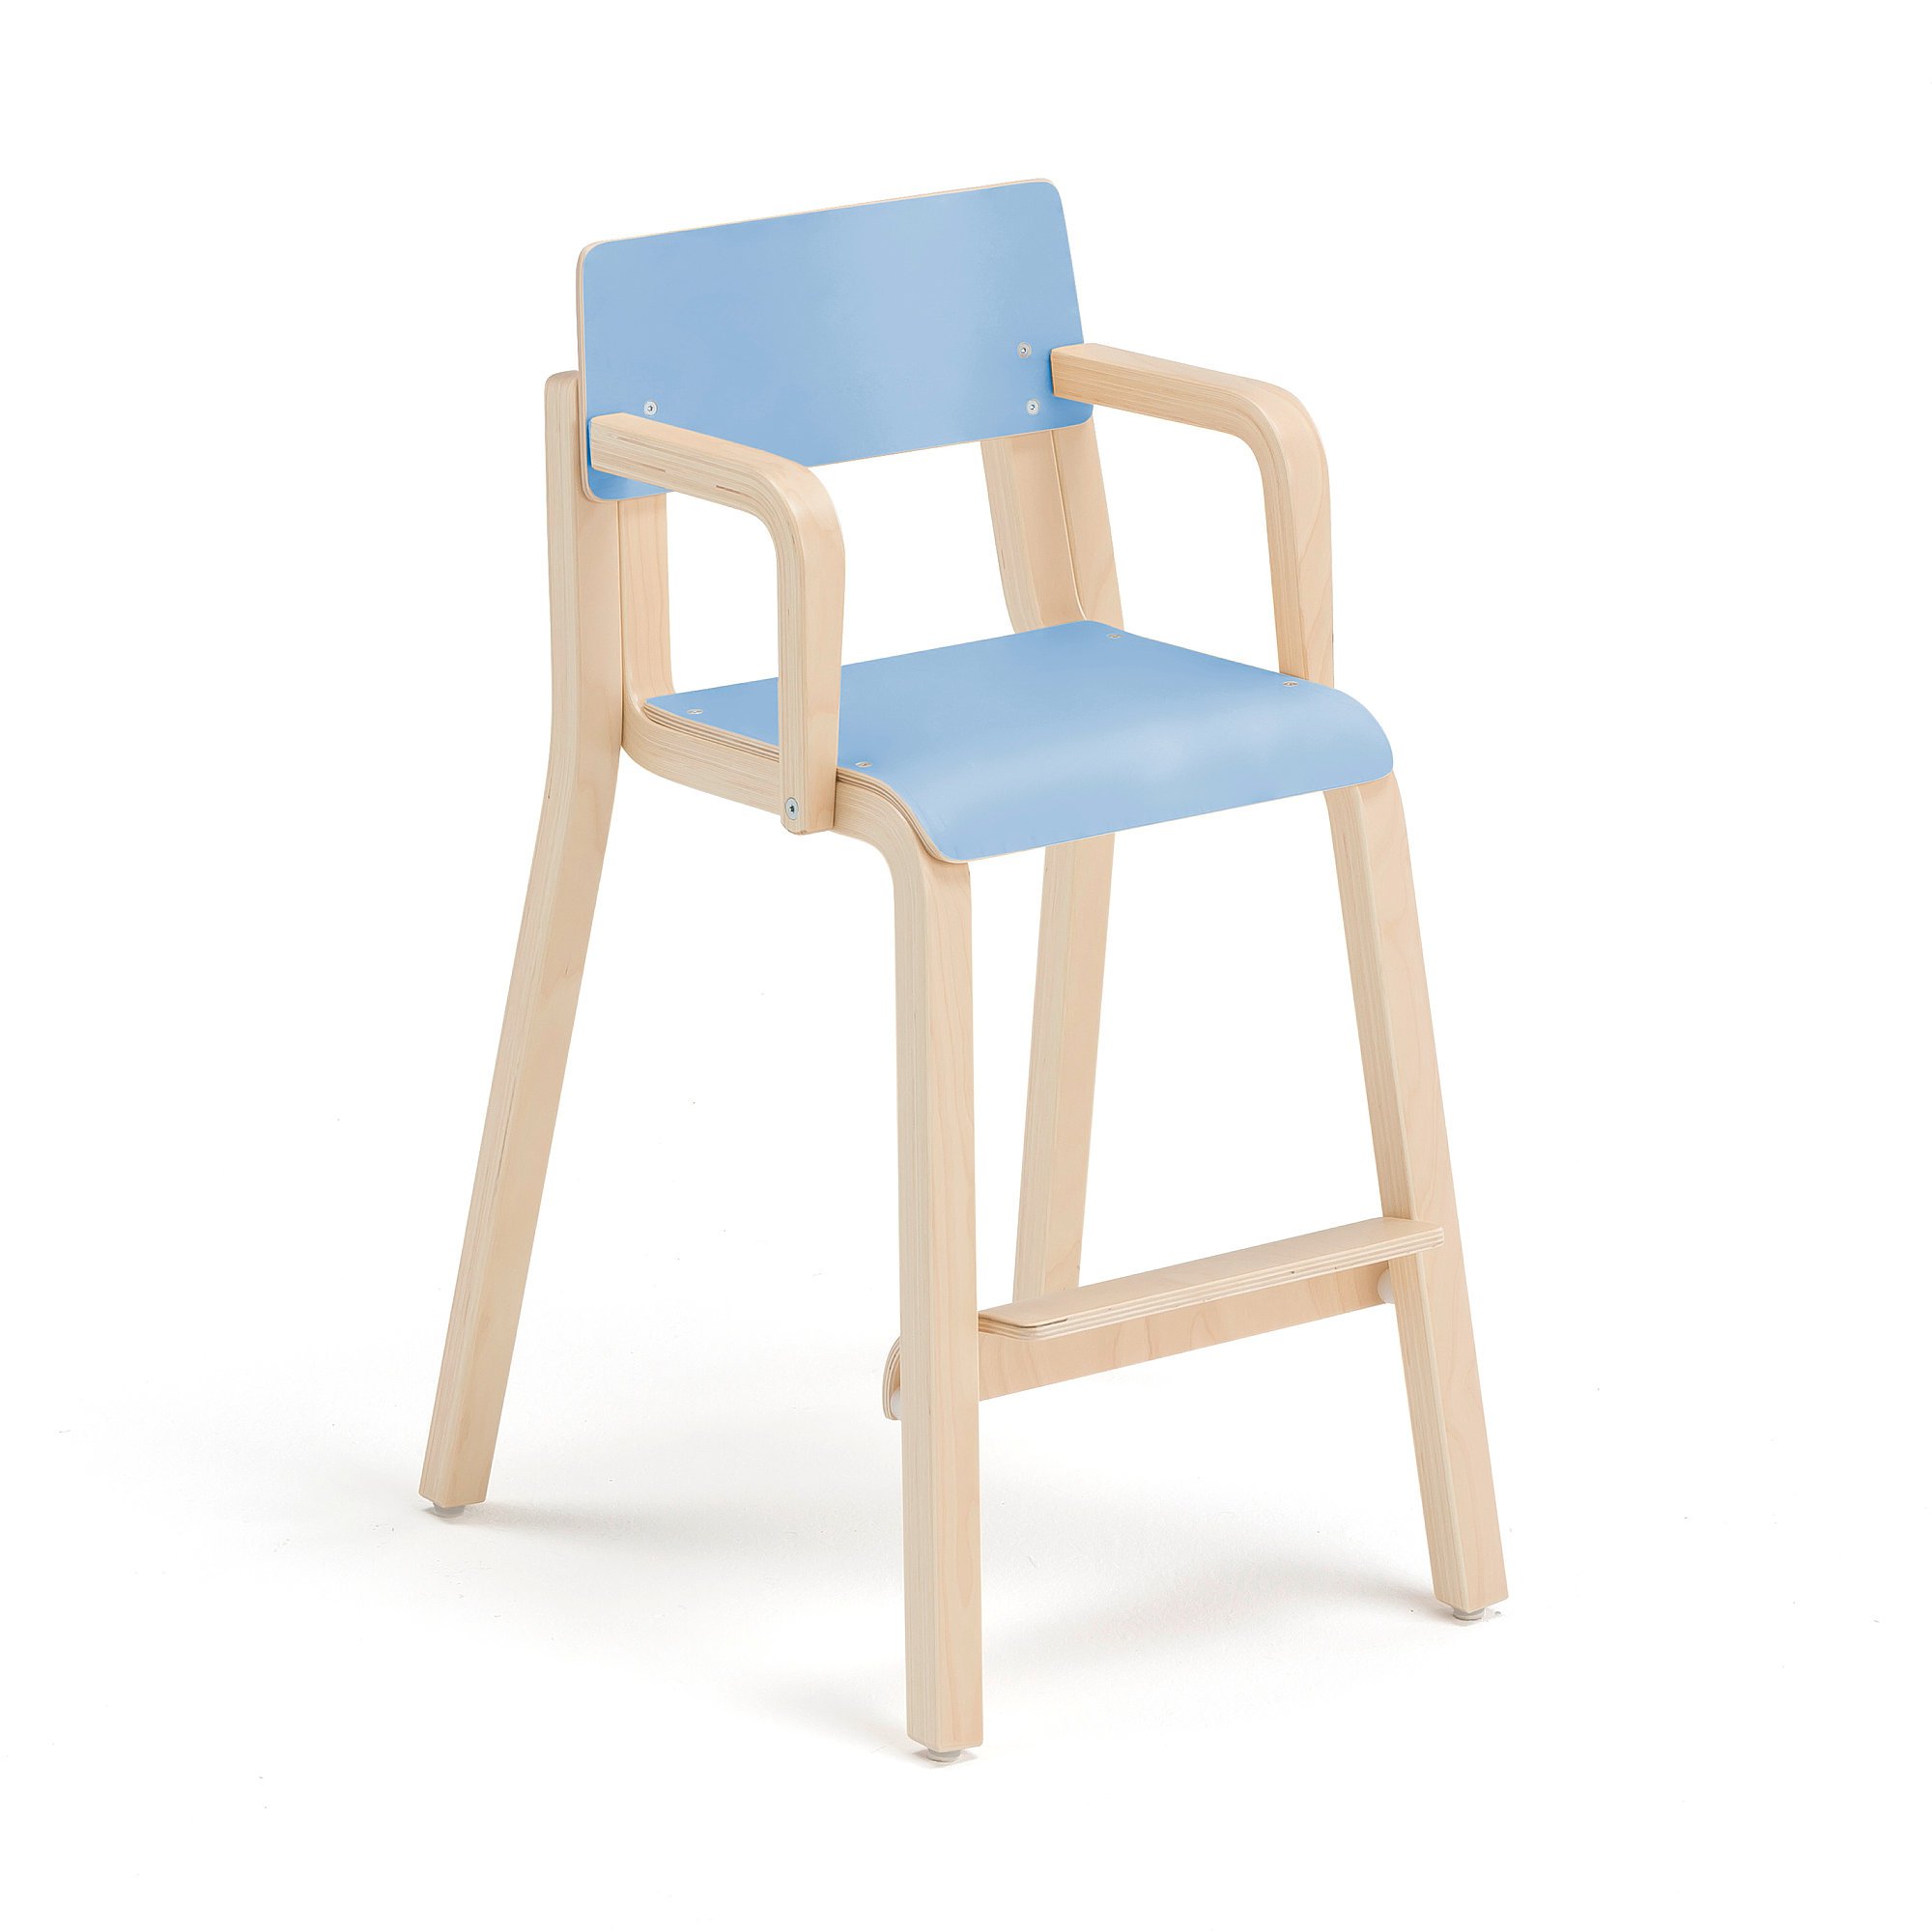 Tall children's chair DANTE with armrests, H 500 mm, birch, blue laminate